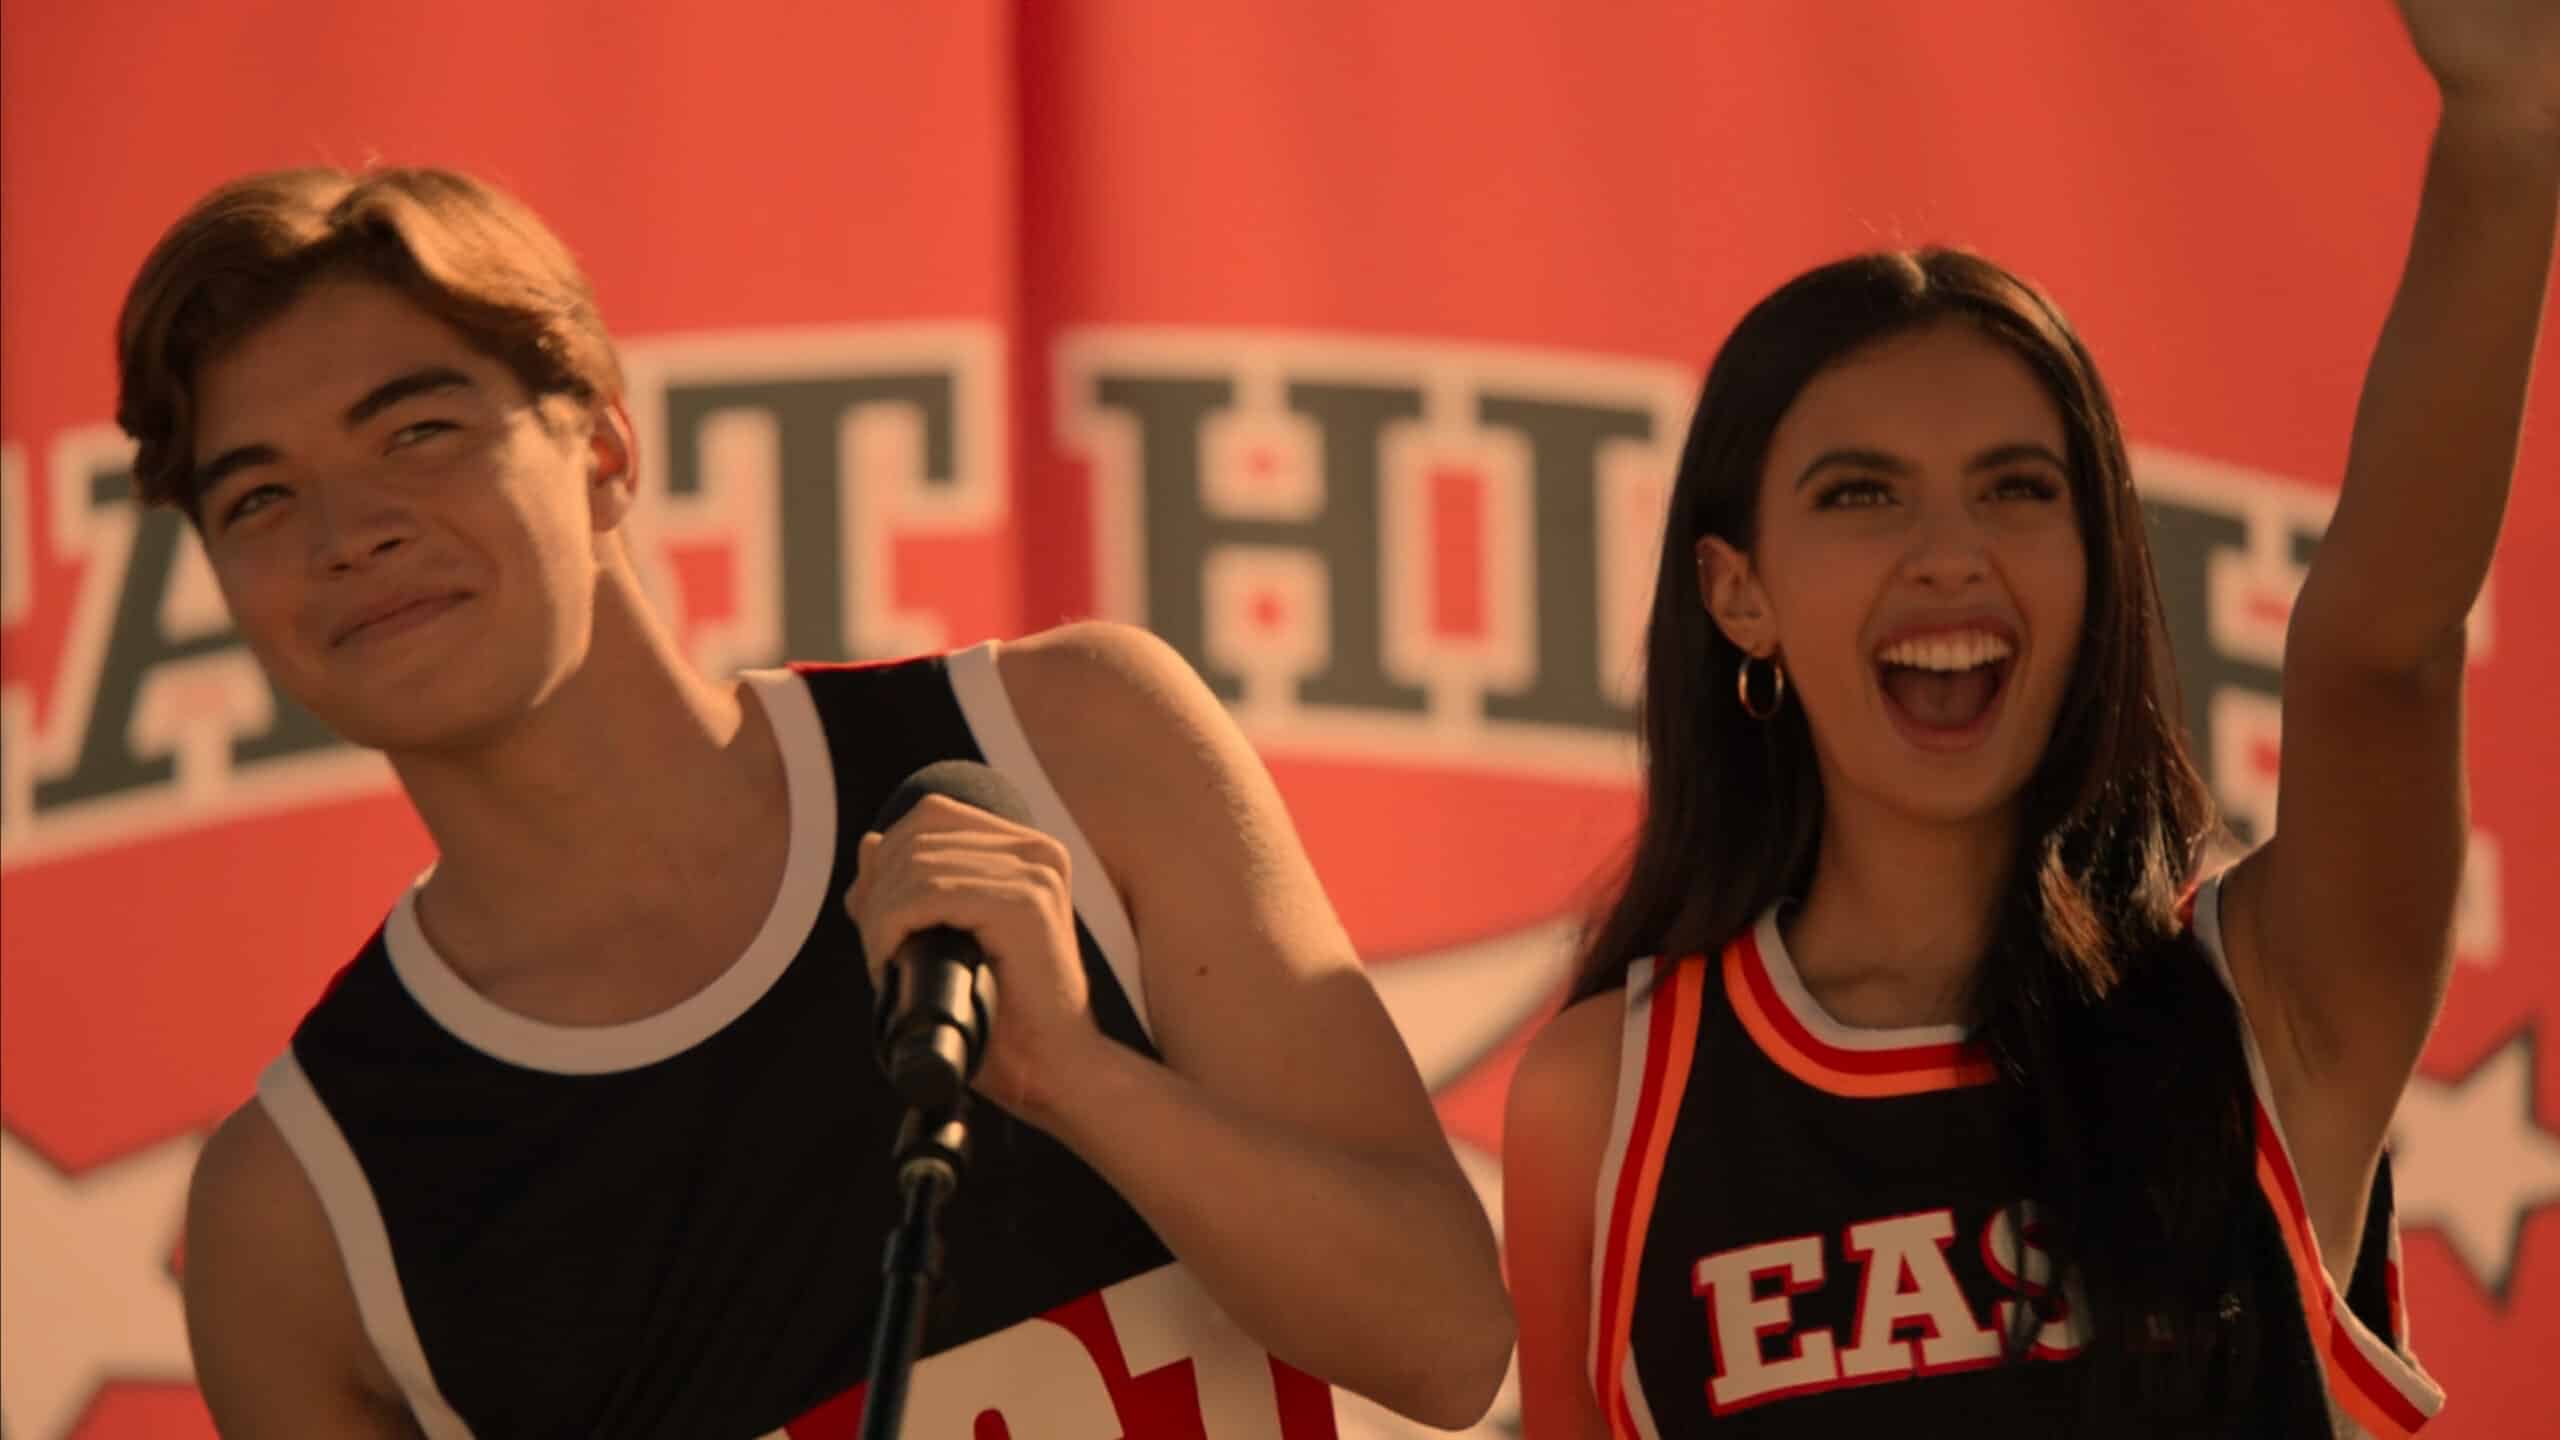 Mack (Matthew Sato) and Dani (Kylie Cantrall) being introduced as new cast members in the 'High School Musical' franchise